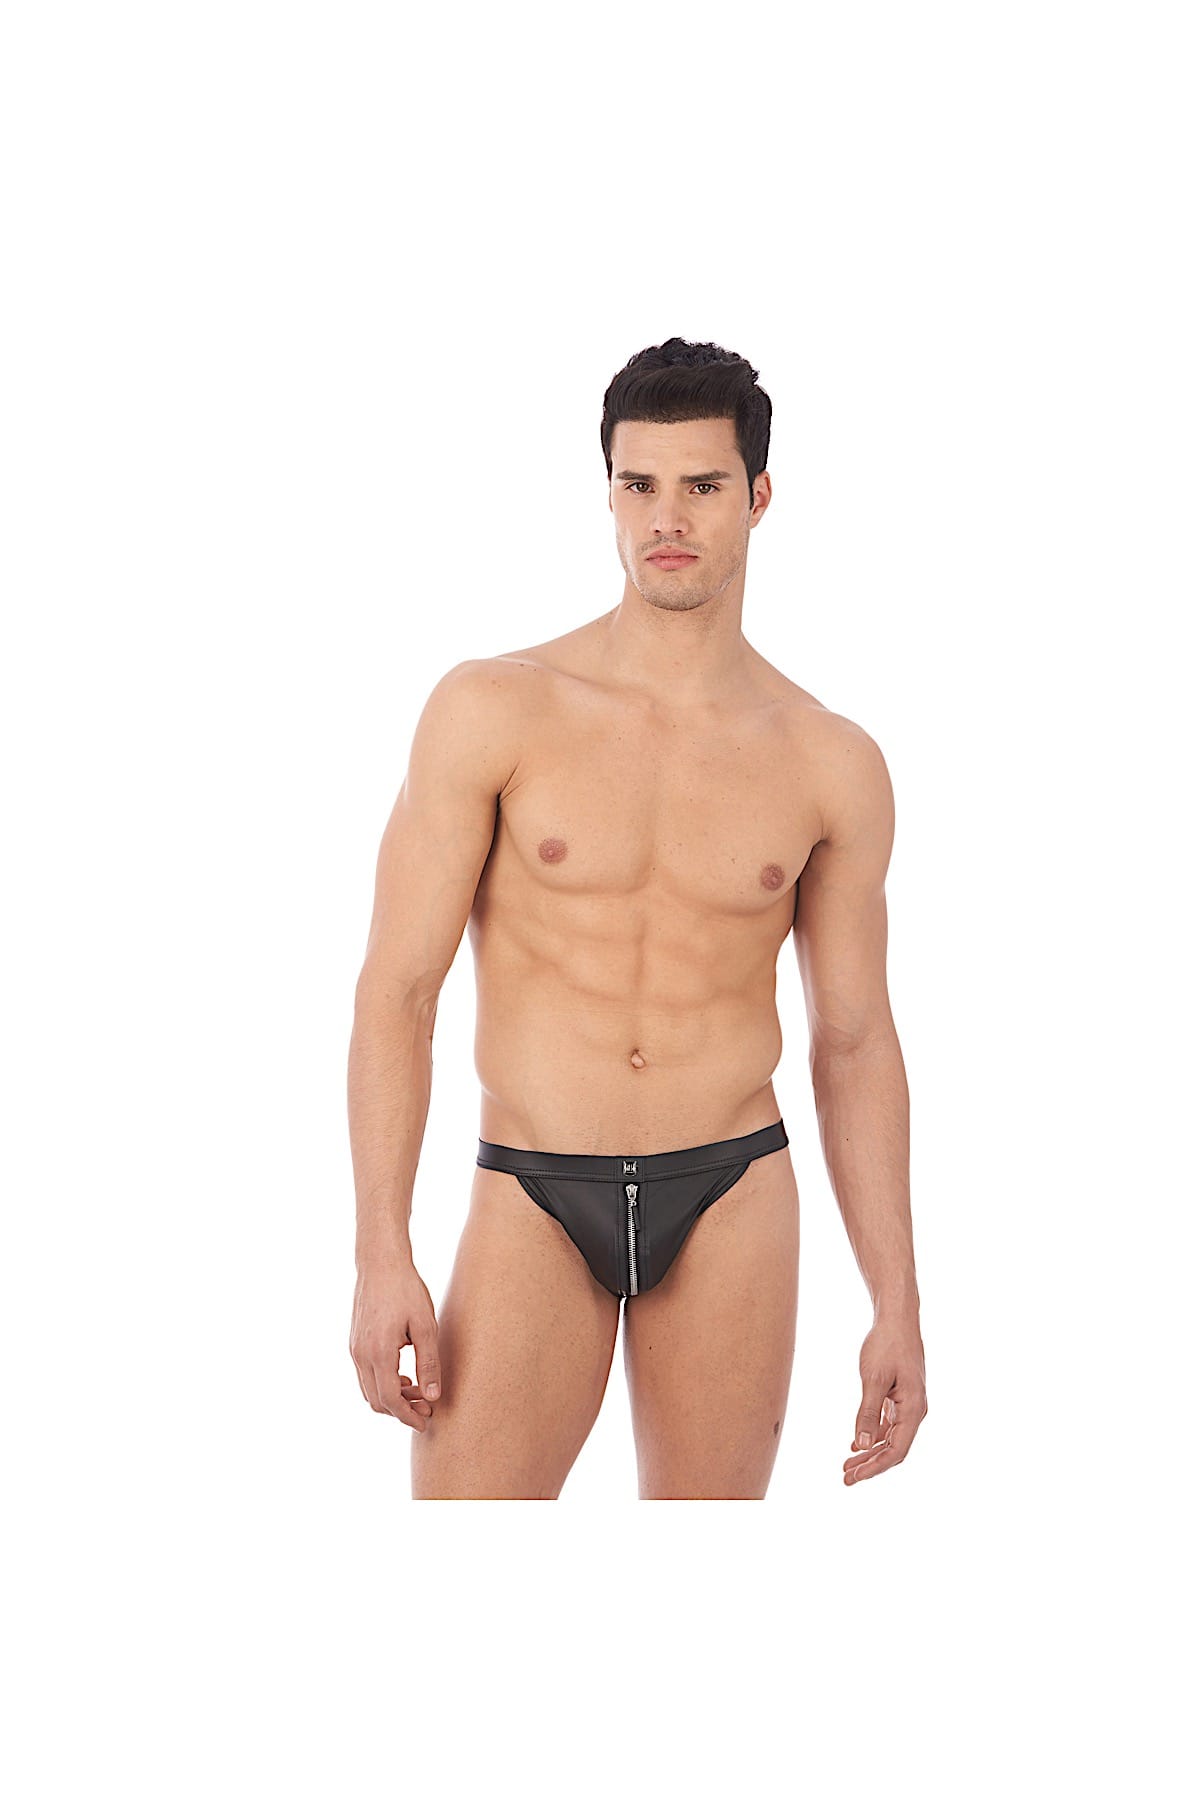 Gregg Homme Black Reckless Zipper Leather-Look Thong – CheapUndies